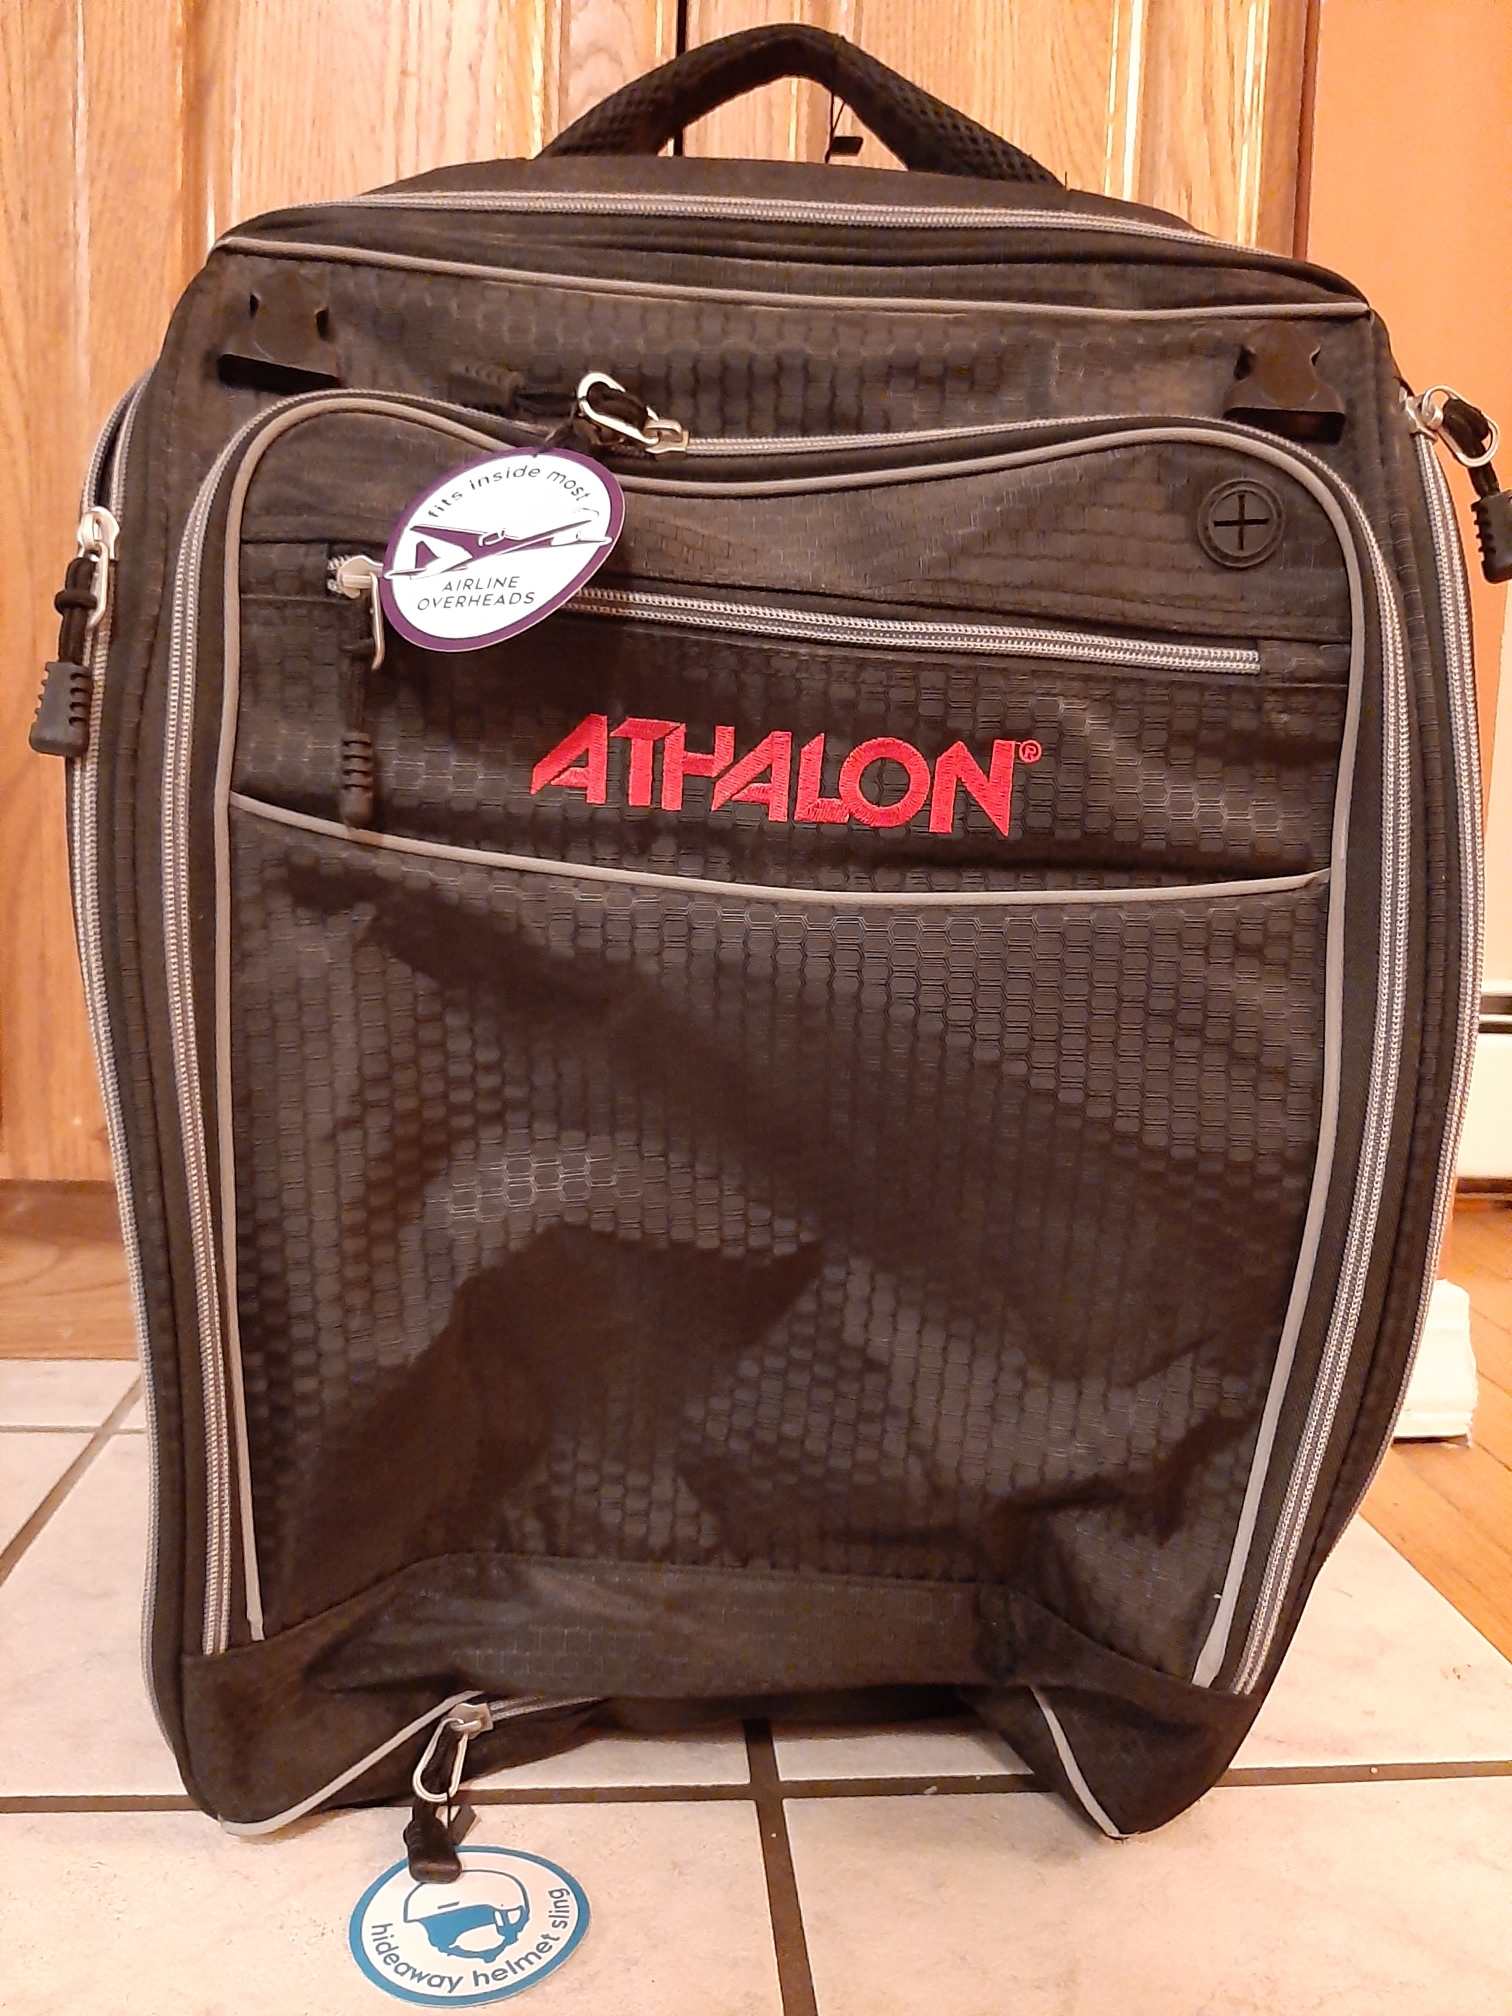 NEW Athalon "Onboard" Convertible Boot Bag